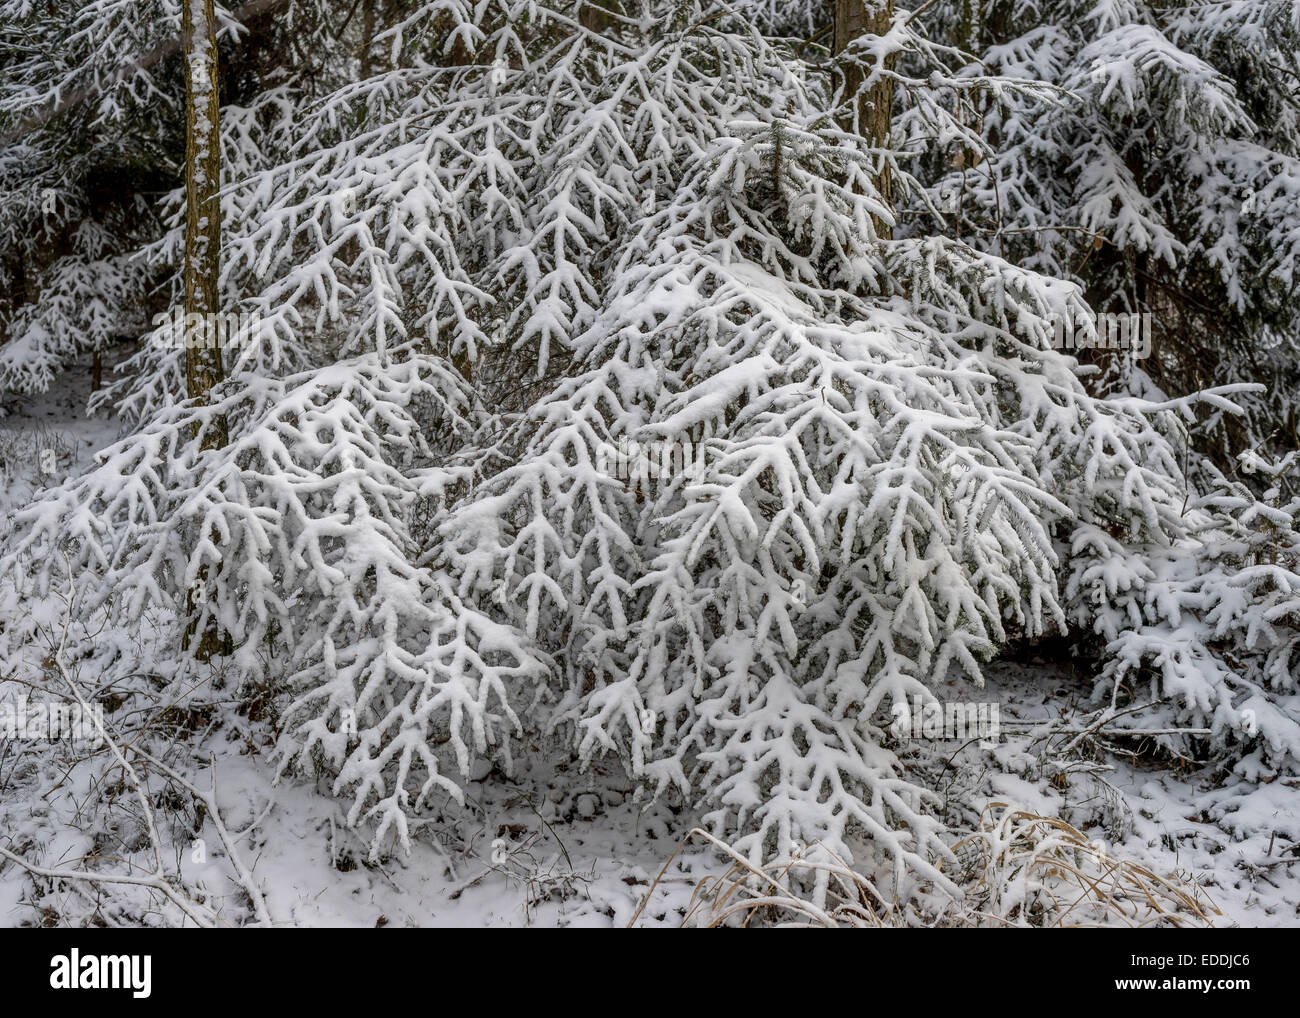 Spruce tree forest covered with snow Stock Photo